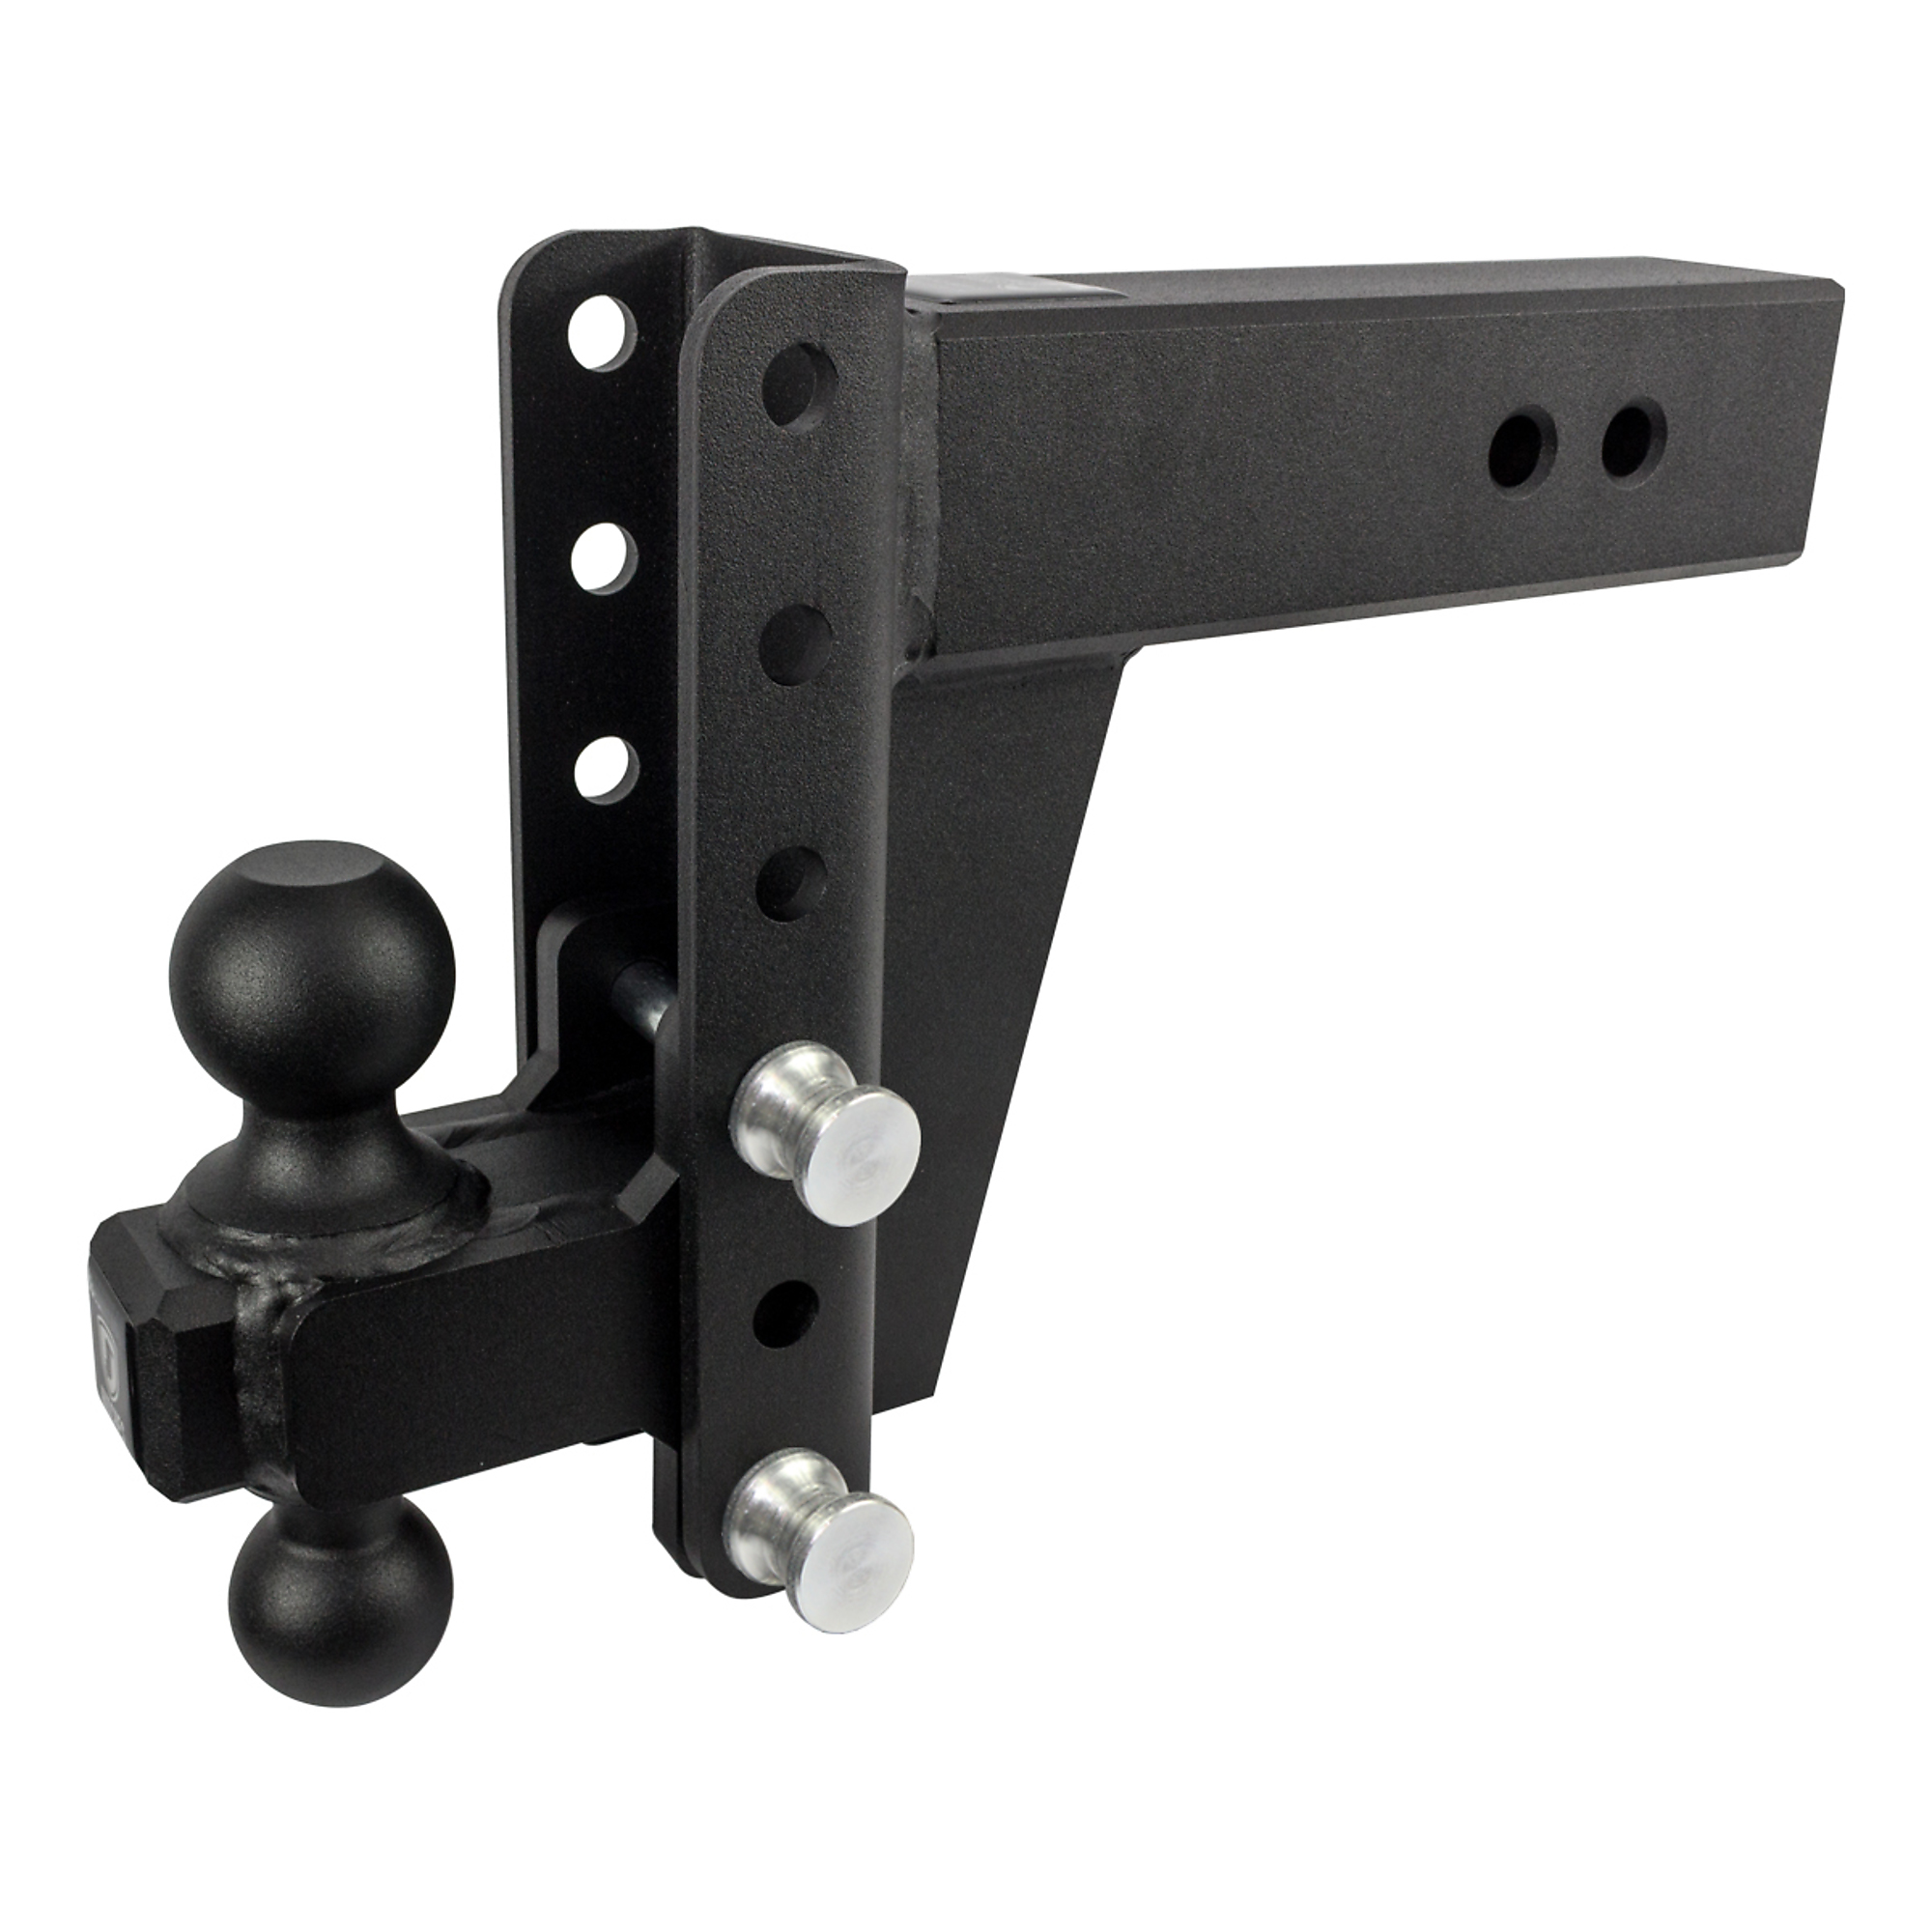 BulletProof Hitches, 3.0Inch EXTREME DUTY 6Inch DROP/RISE HITCH, Model ED306